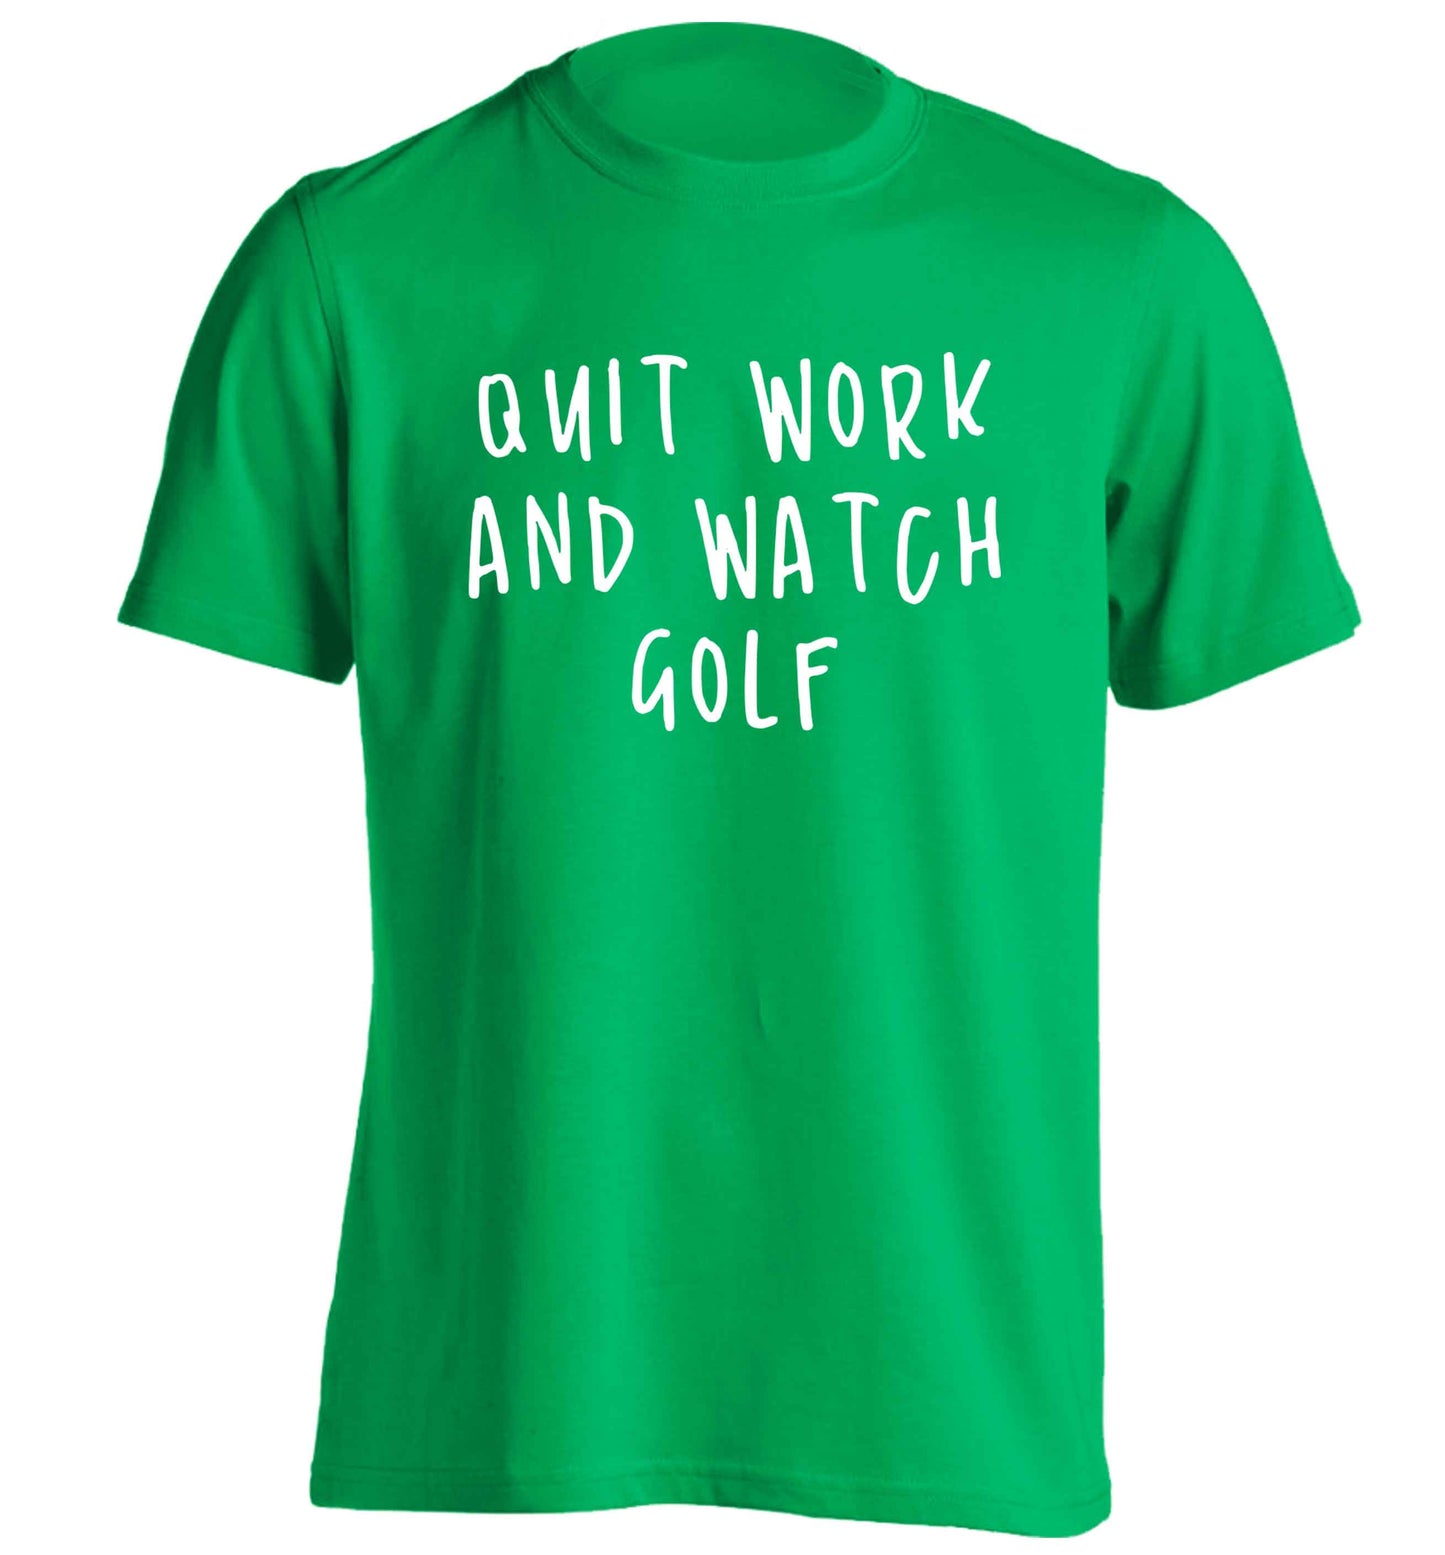 Quit work and watch golf adults unisex green Tshirt 2XL